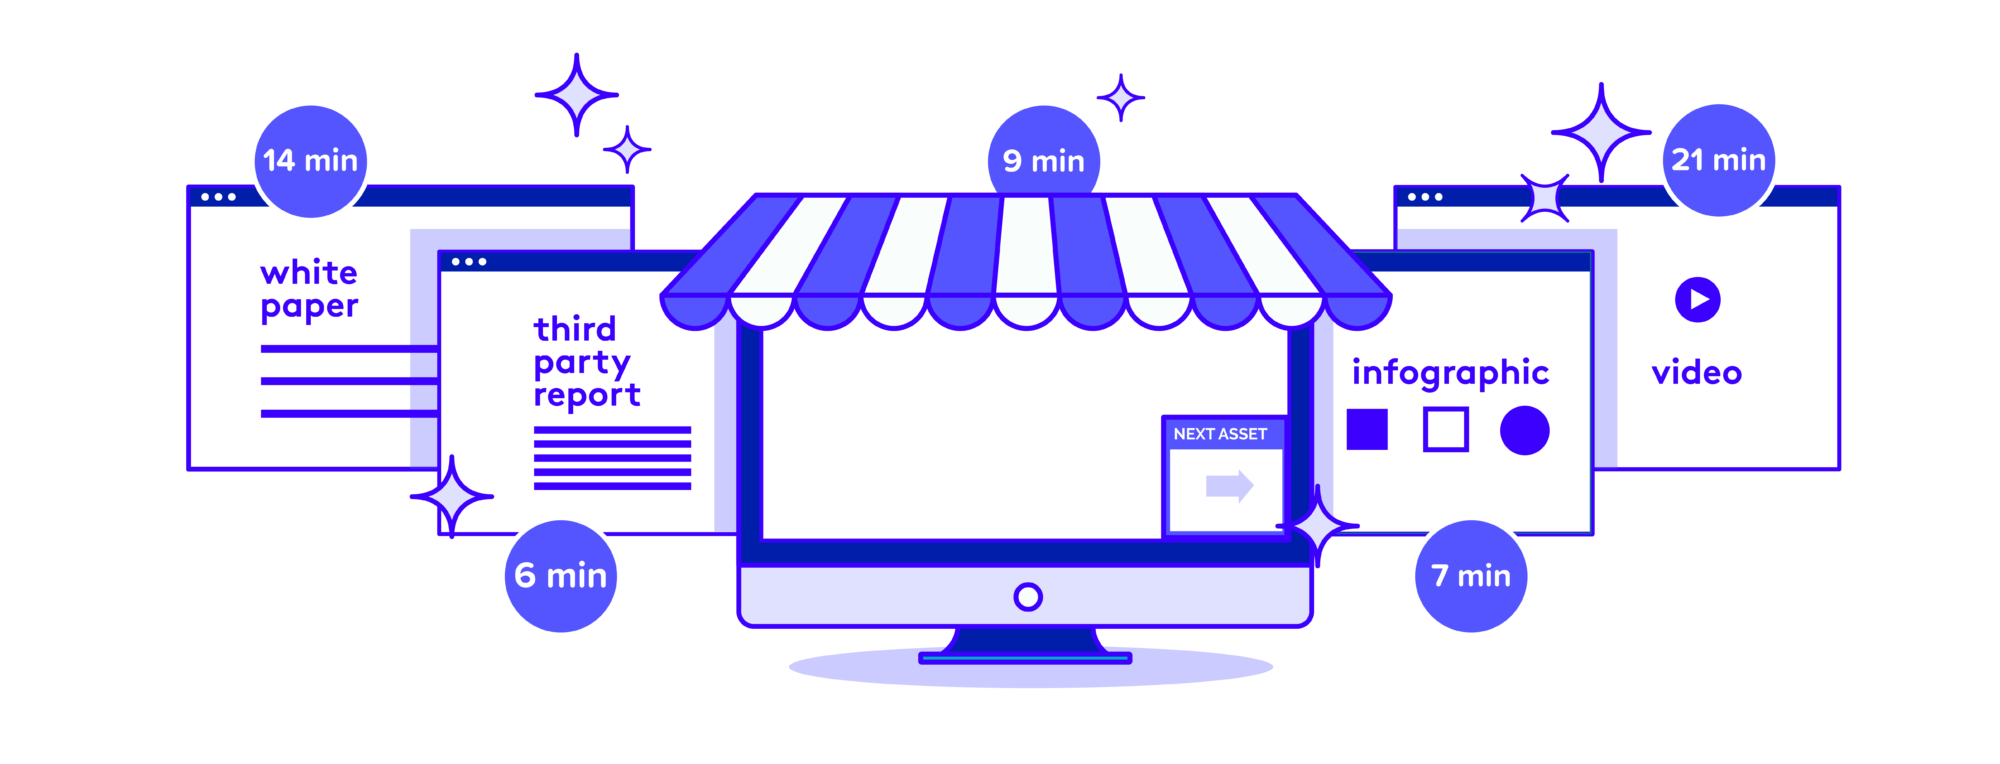 An illustrated computer stylized to look like a store front. On either side are pieces of content with time's attributed to them, representing the prospect spending time across multiple assets. A white paper has 14 minutes of engagement, a third party report has 6 minutes, an infographic as 7 minutes and a video has 21 minutes.